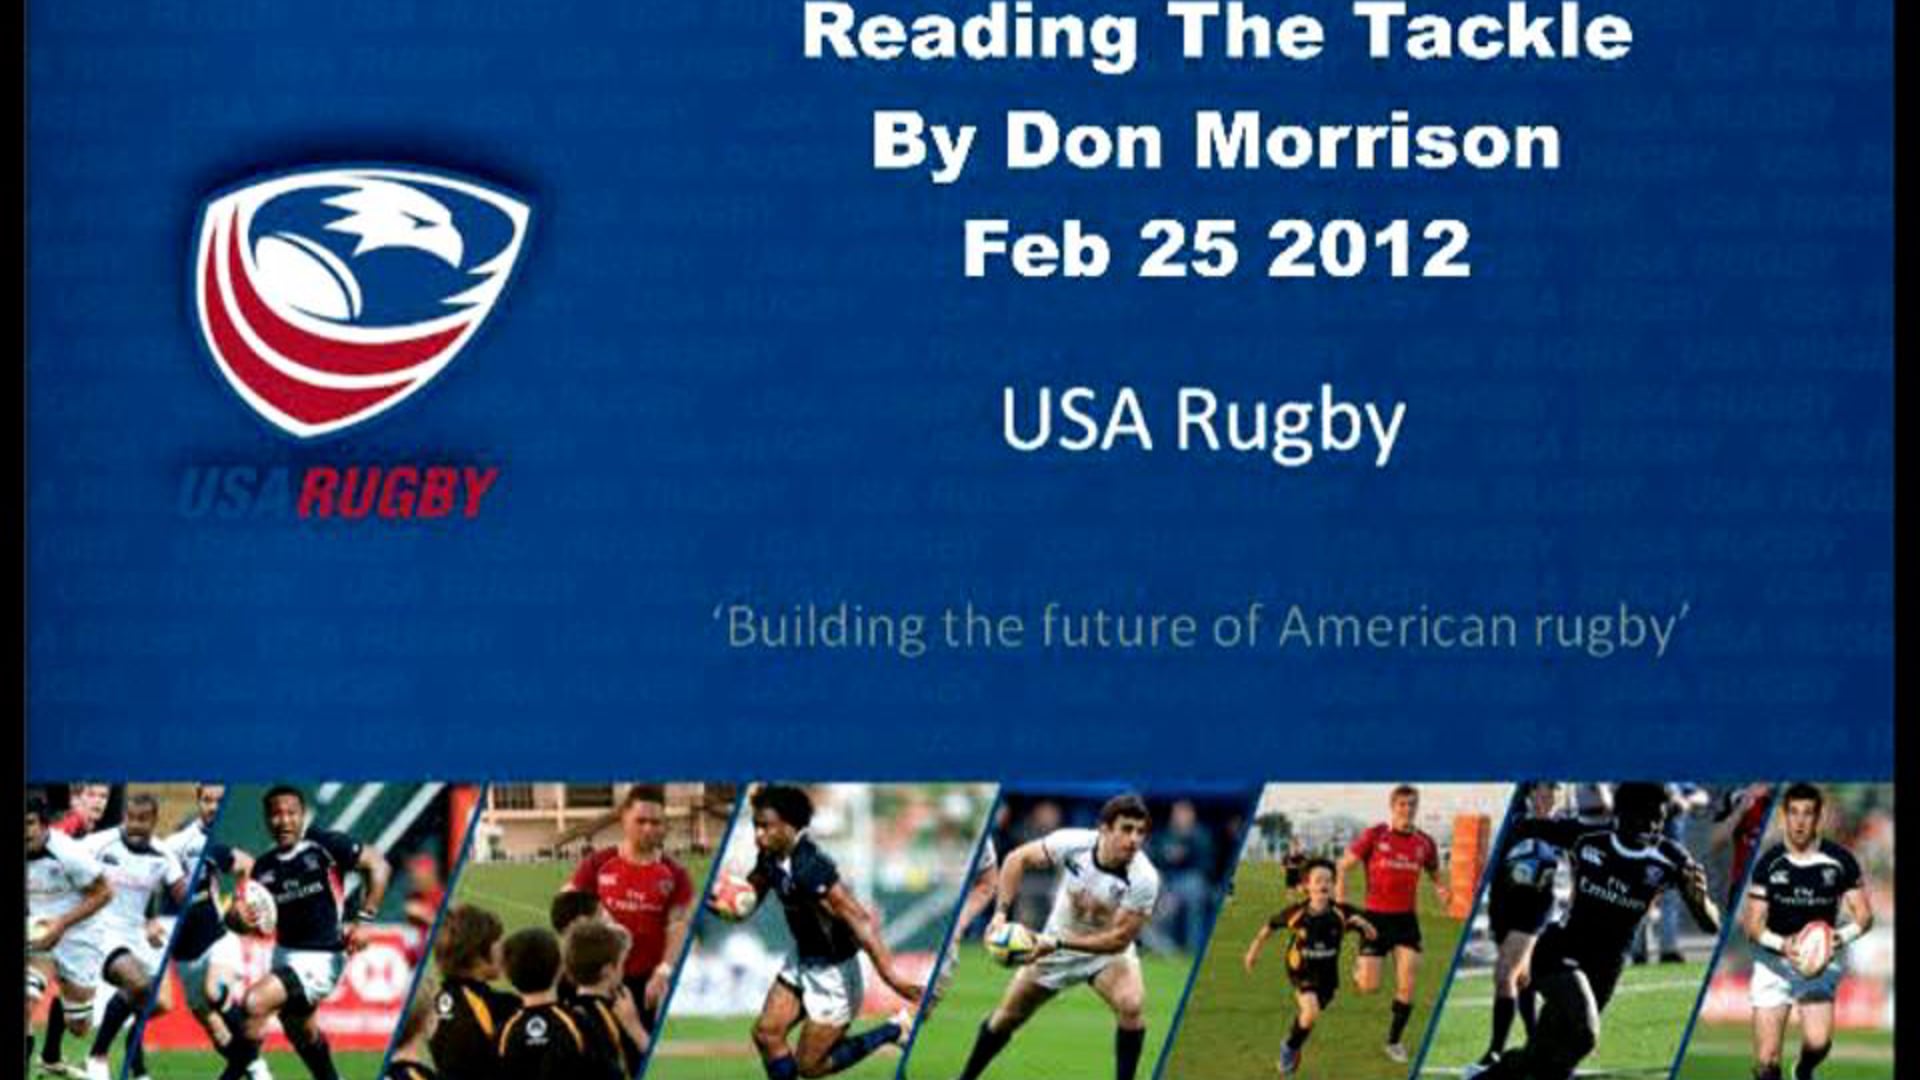 Reading the tackle by don Morrison 2/25/12